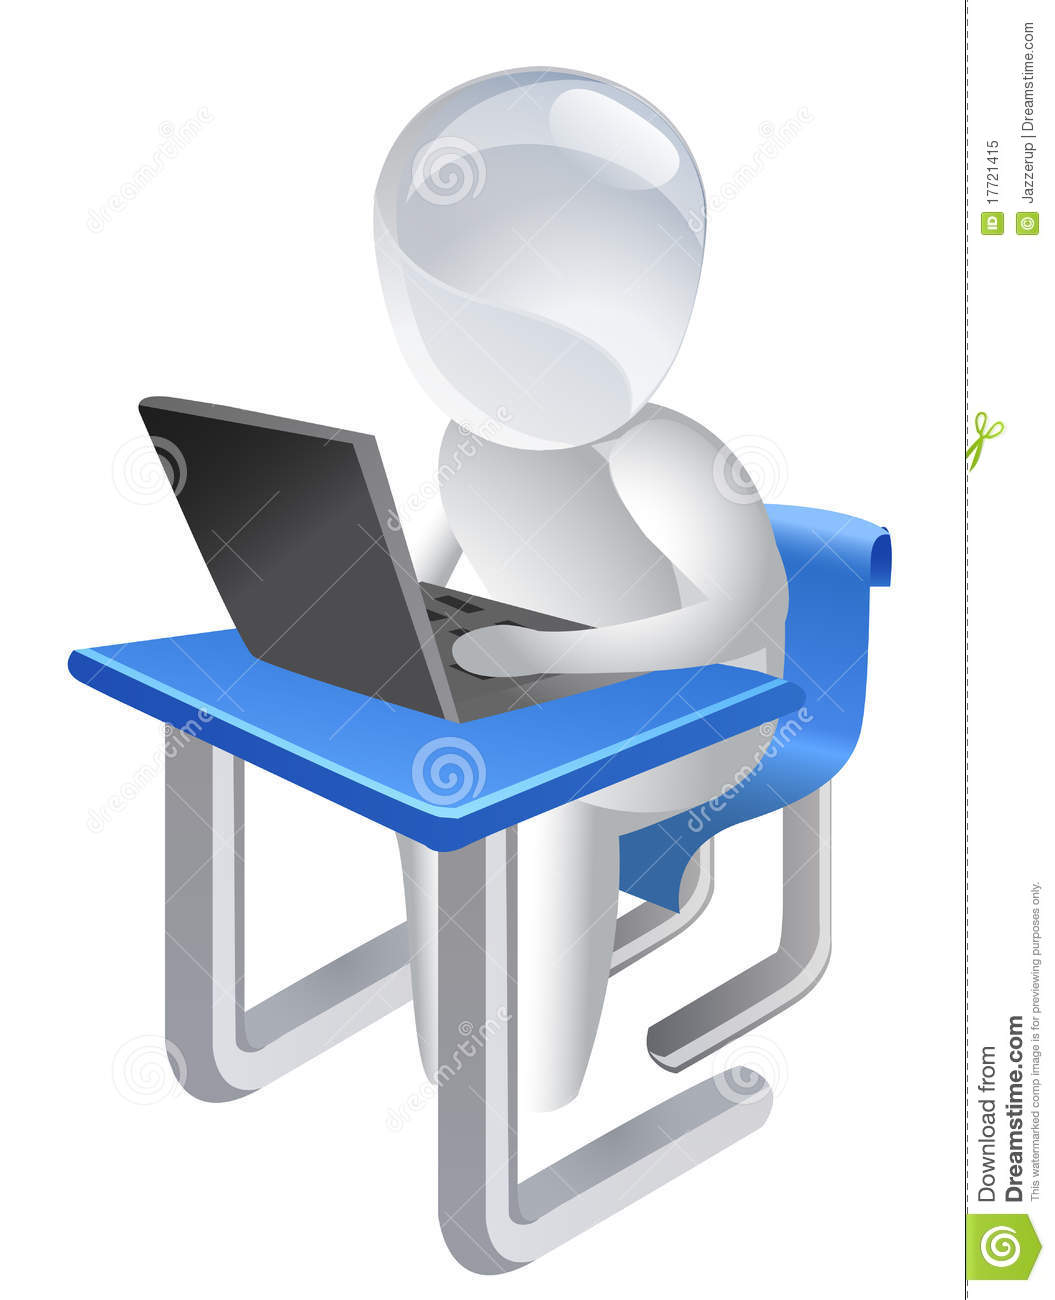 computer user clipart free - photo #16